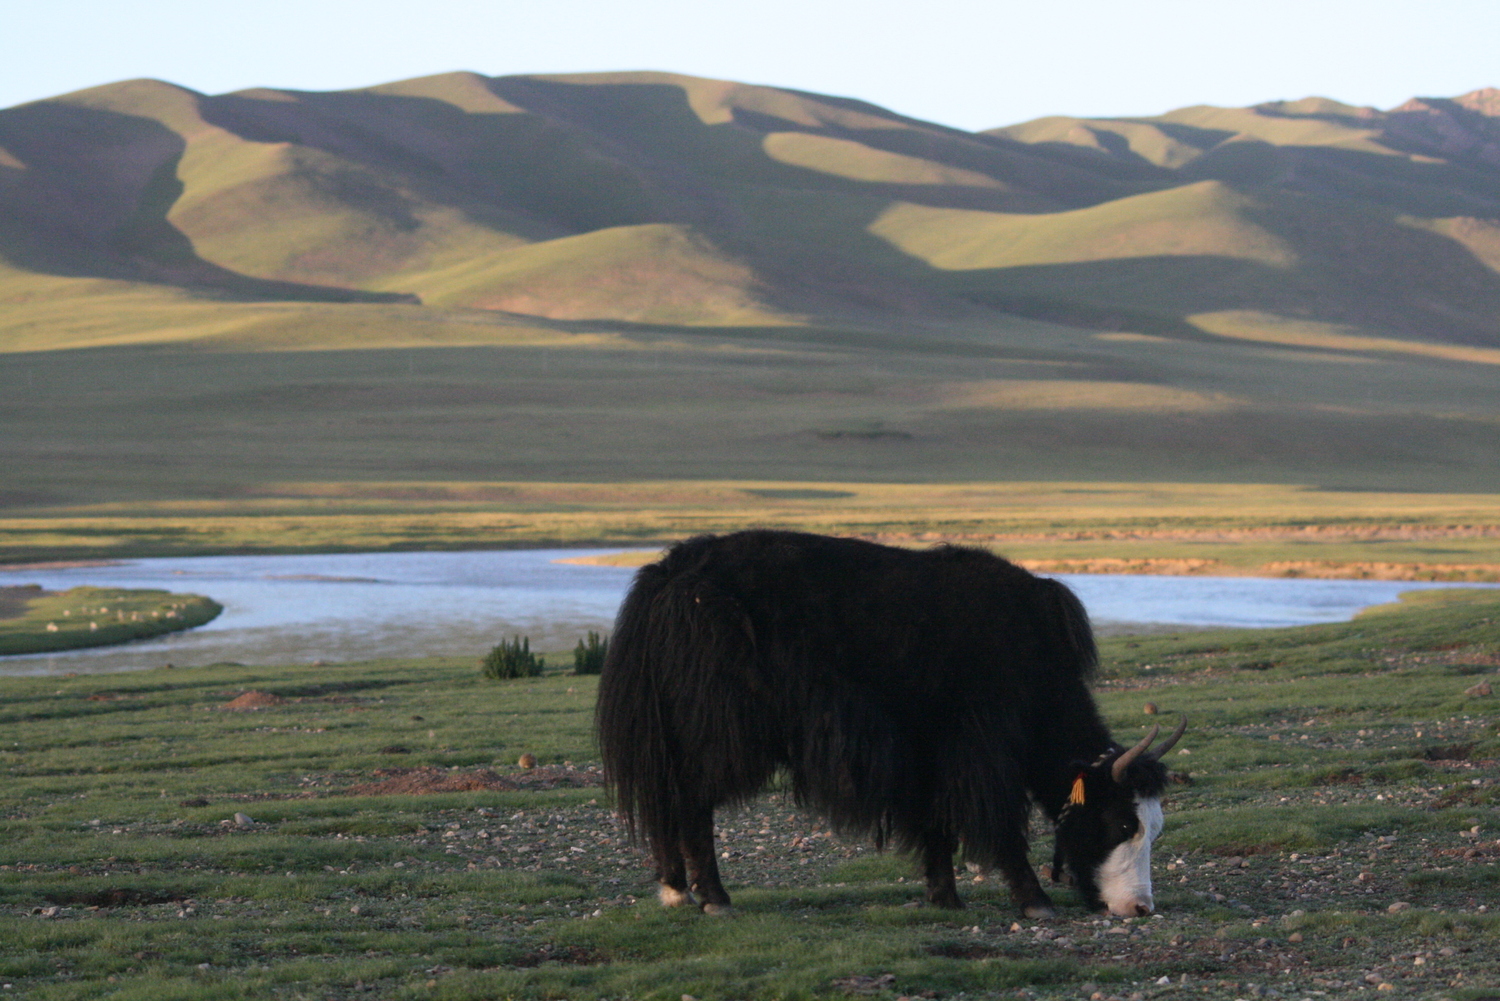 The grazing areas in Tibet are mainly used for yaks.